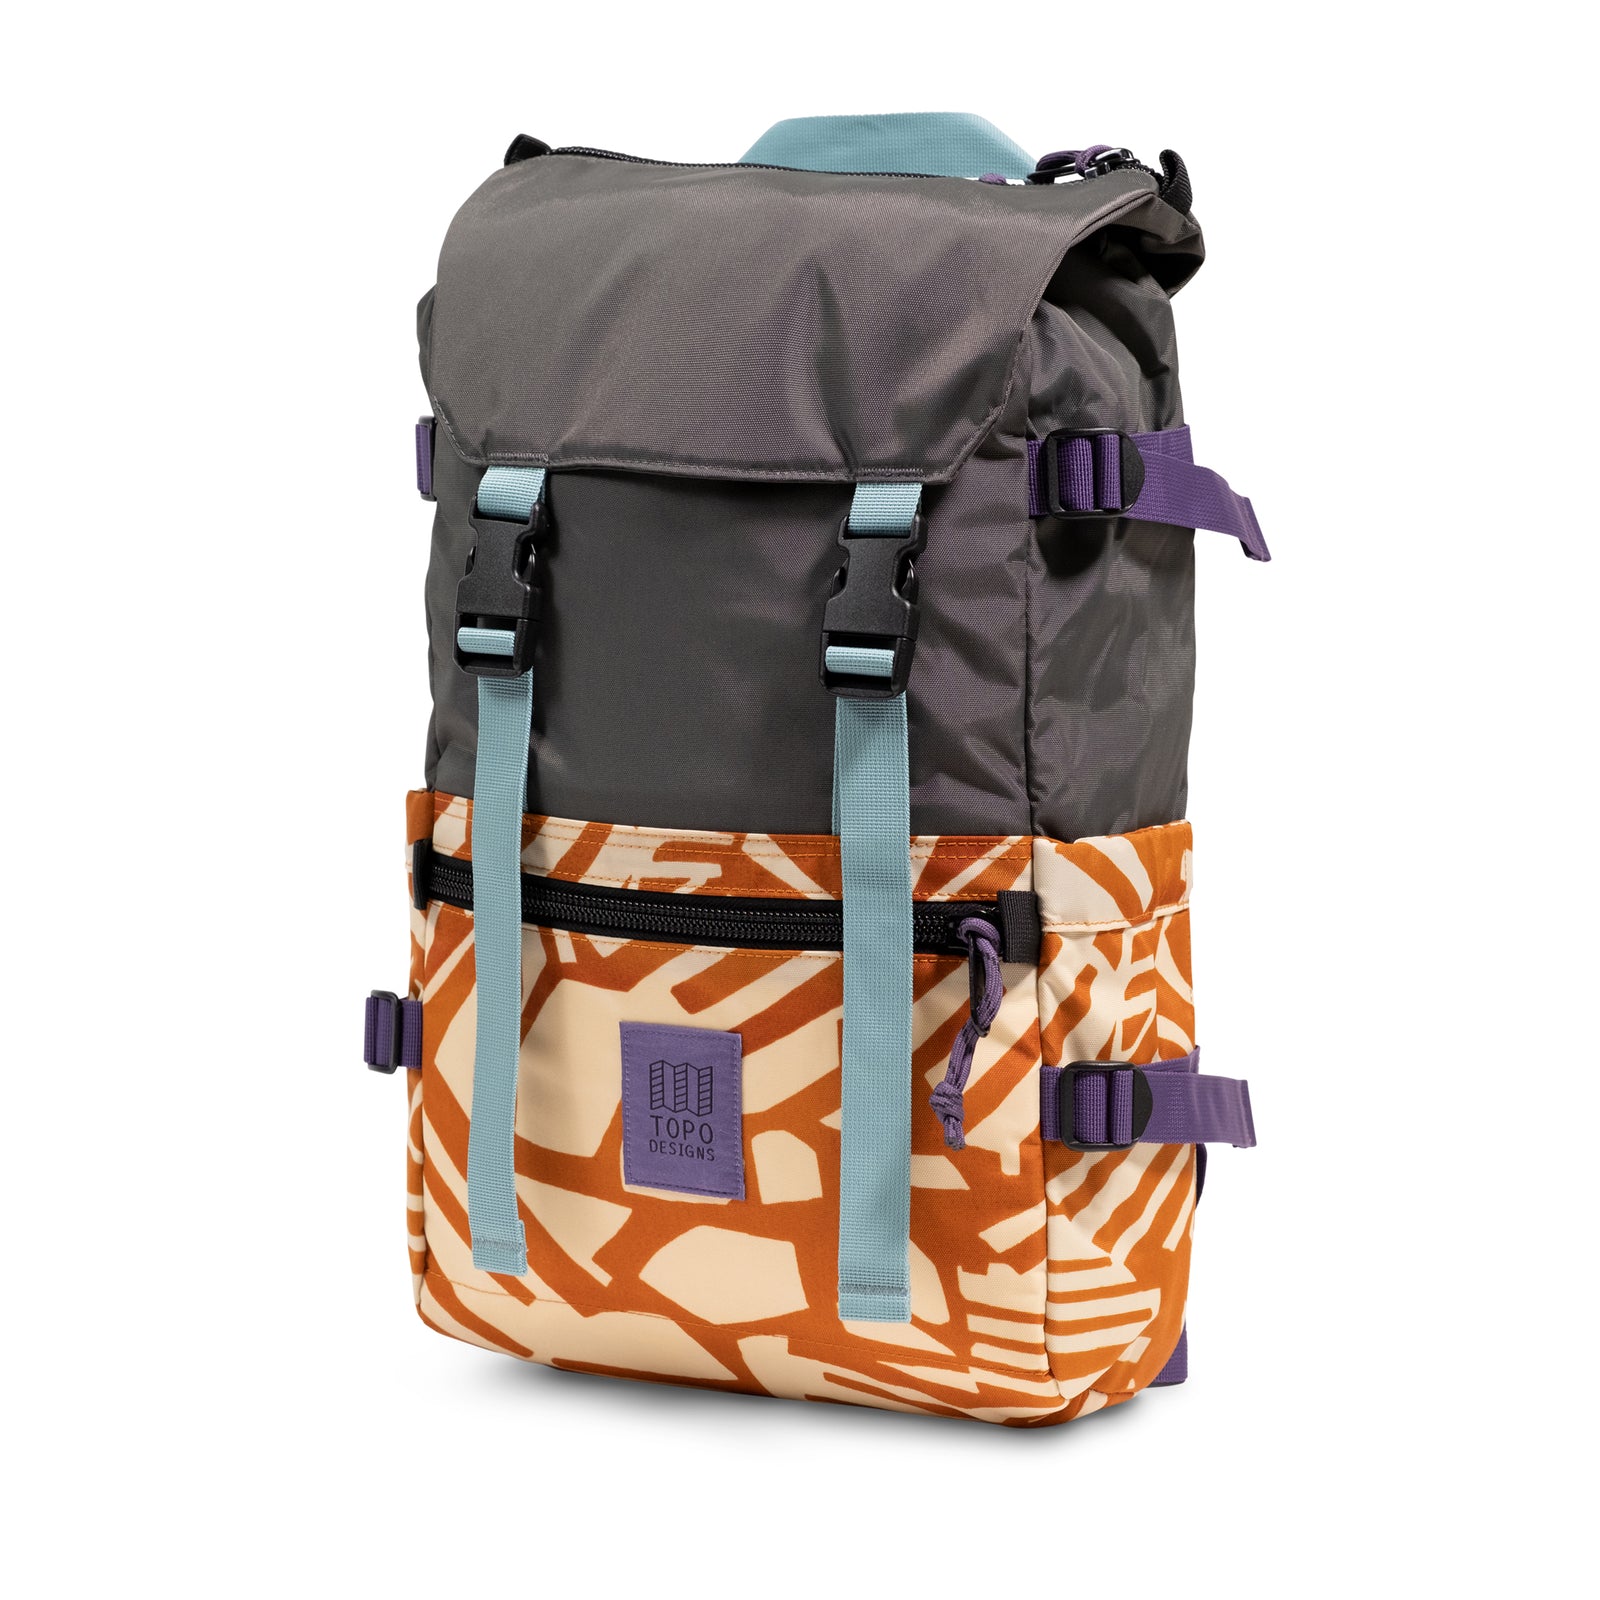 Front View of Topo Designs Rover Pack Classic in "Zion Spice / Asphalt"